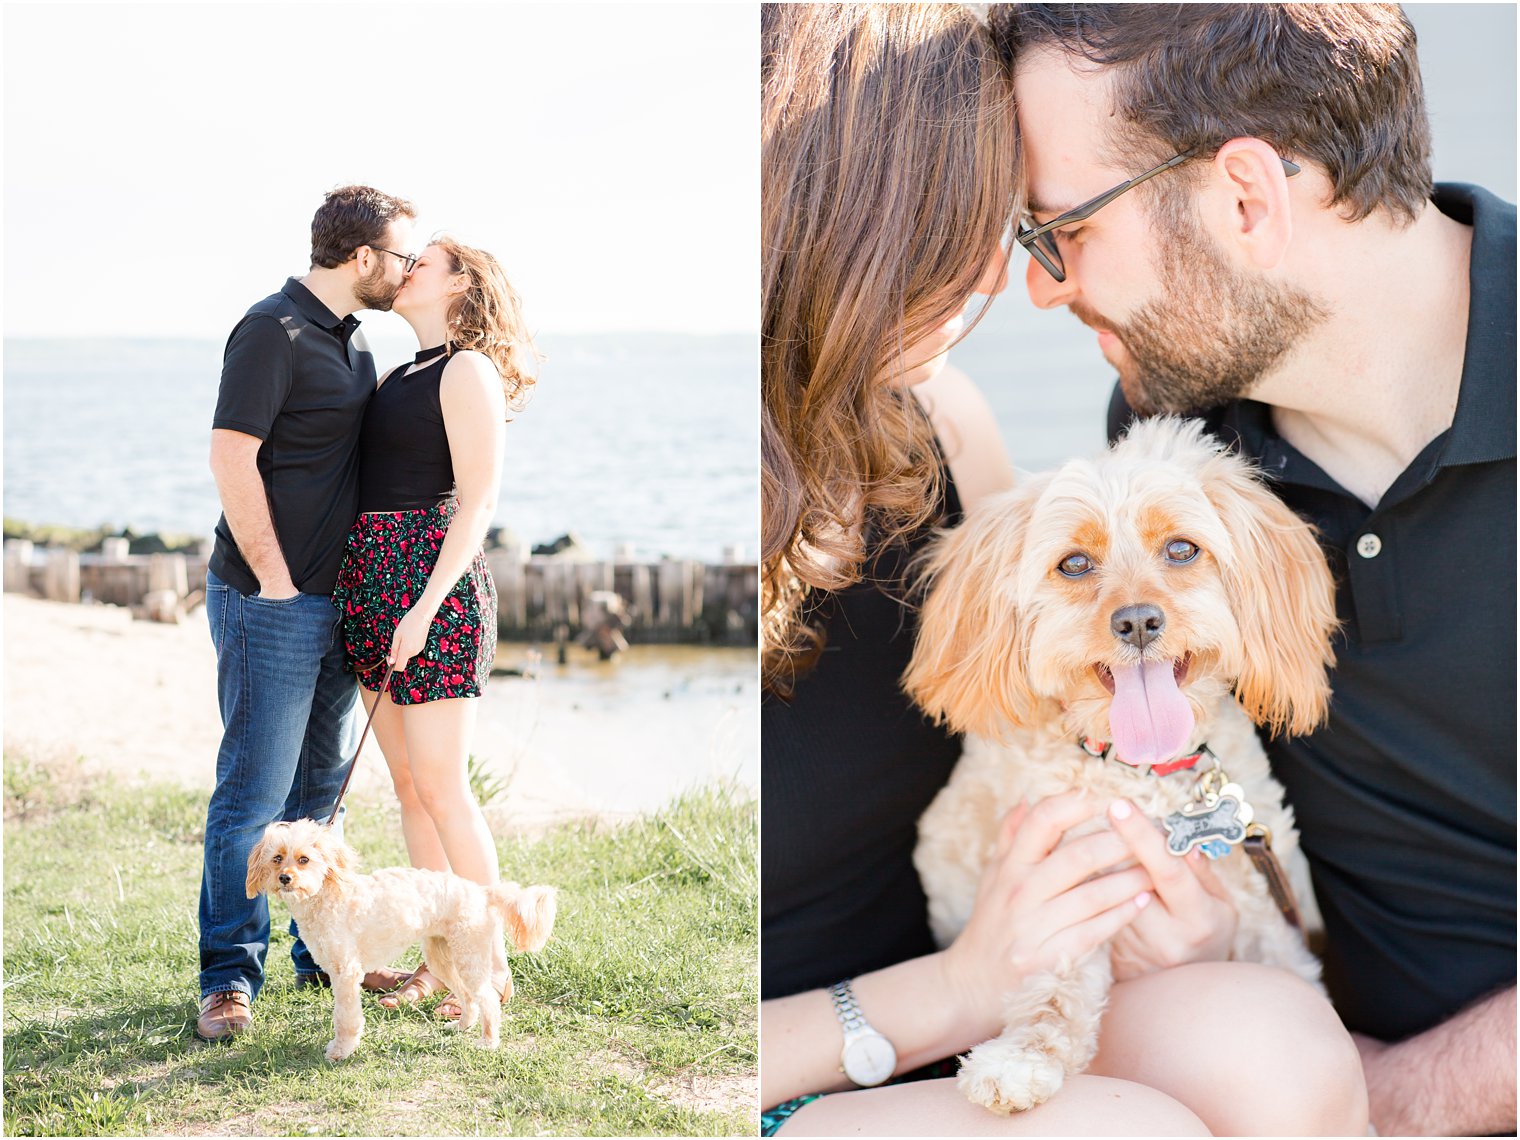 Cute engagement photos of couple with dog